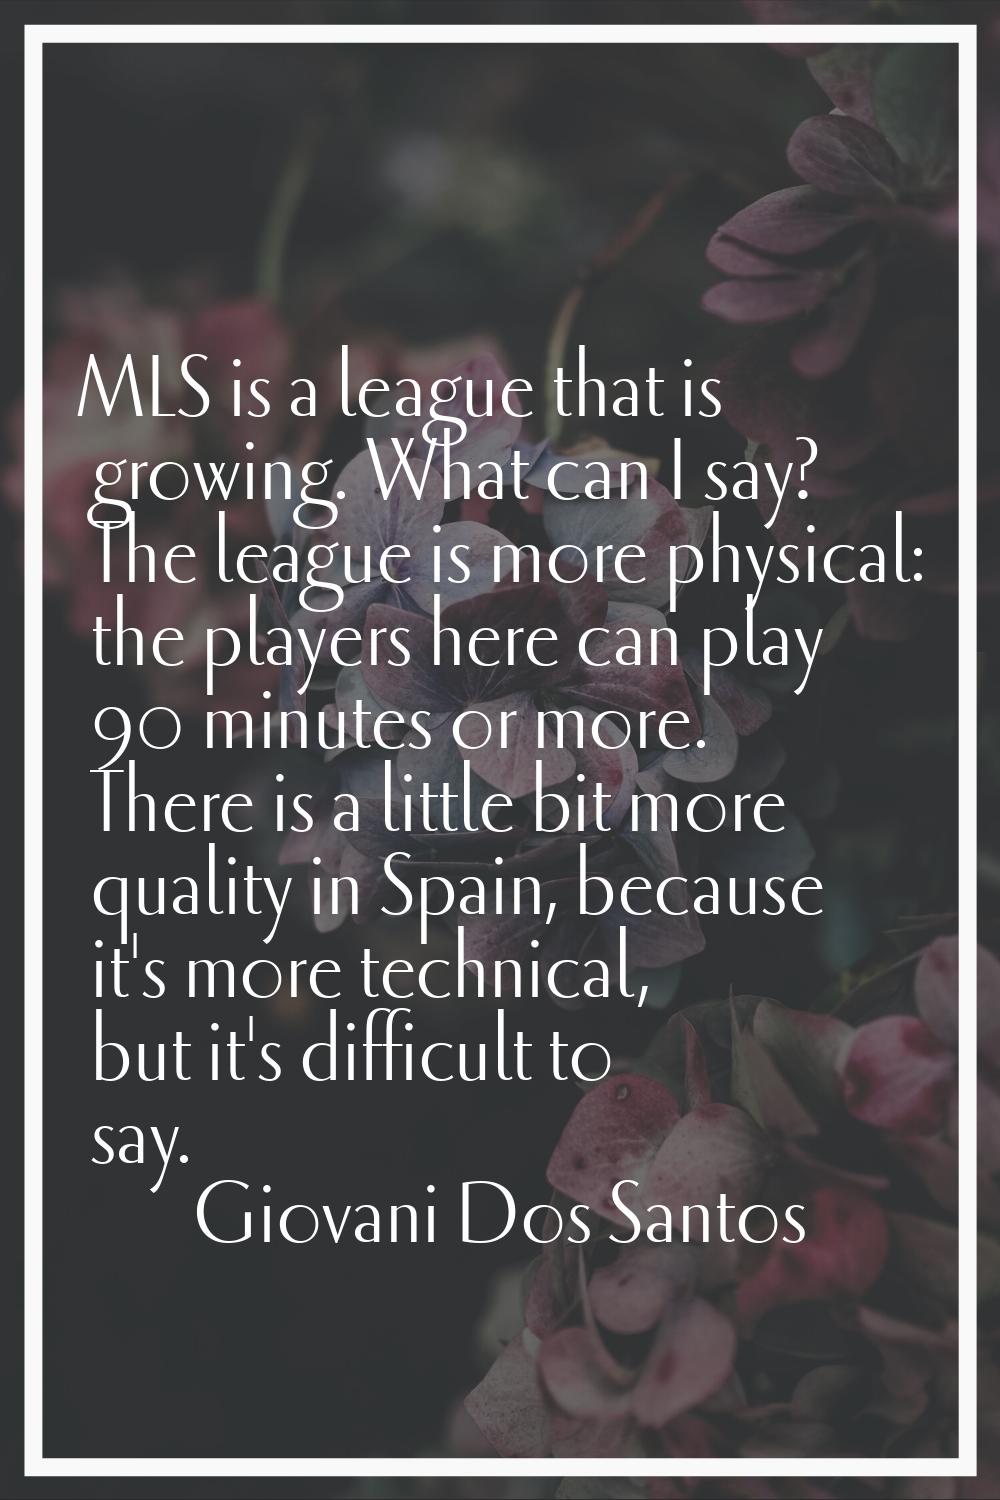 MLS is a league that is growing. What can I say? The league is more physical: the players here can 